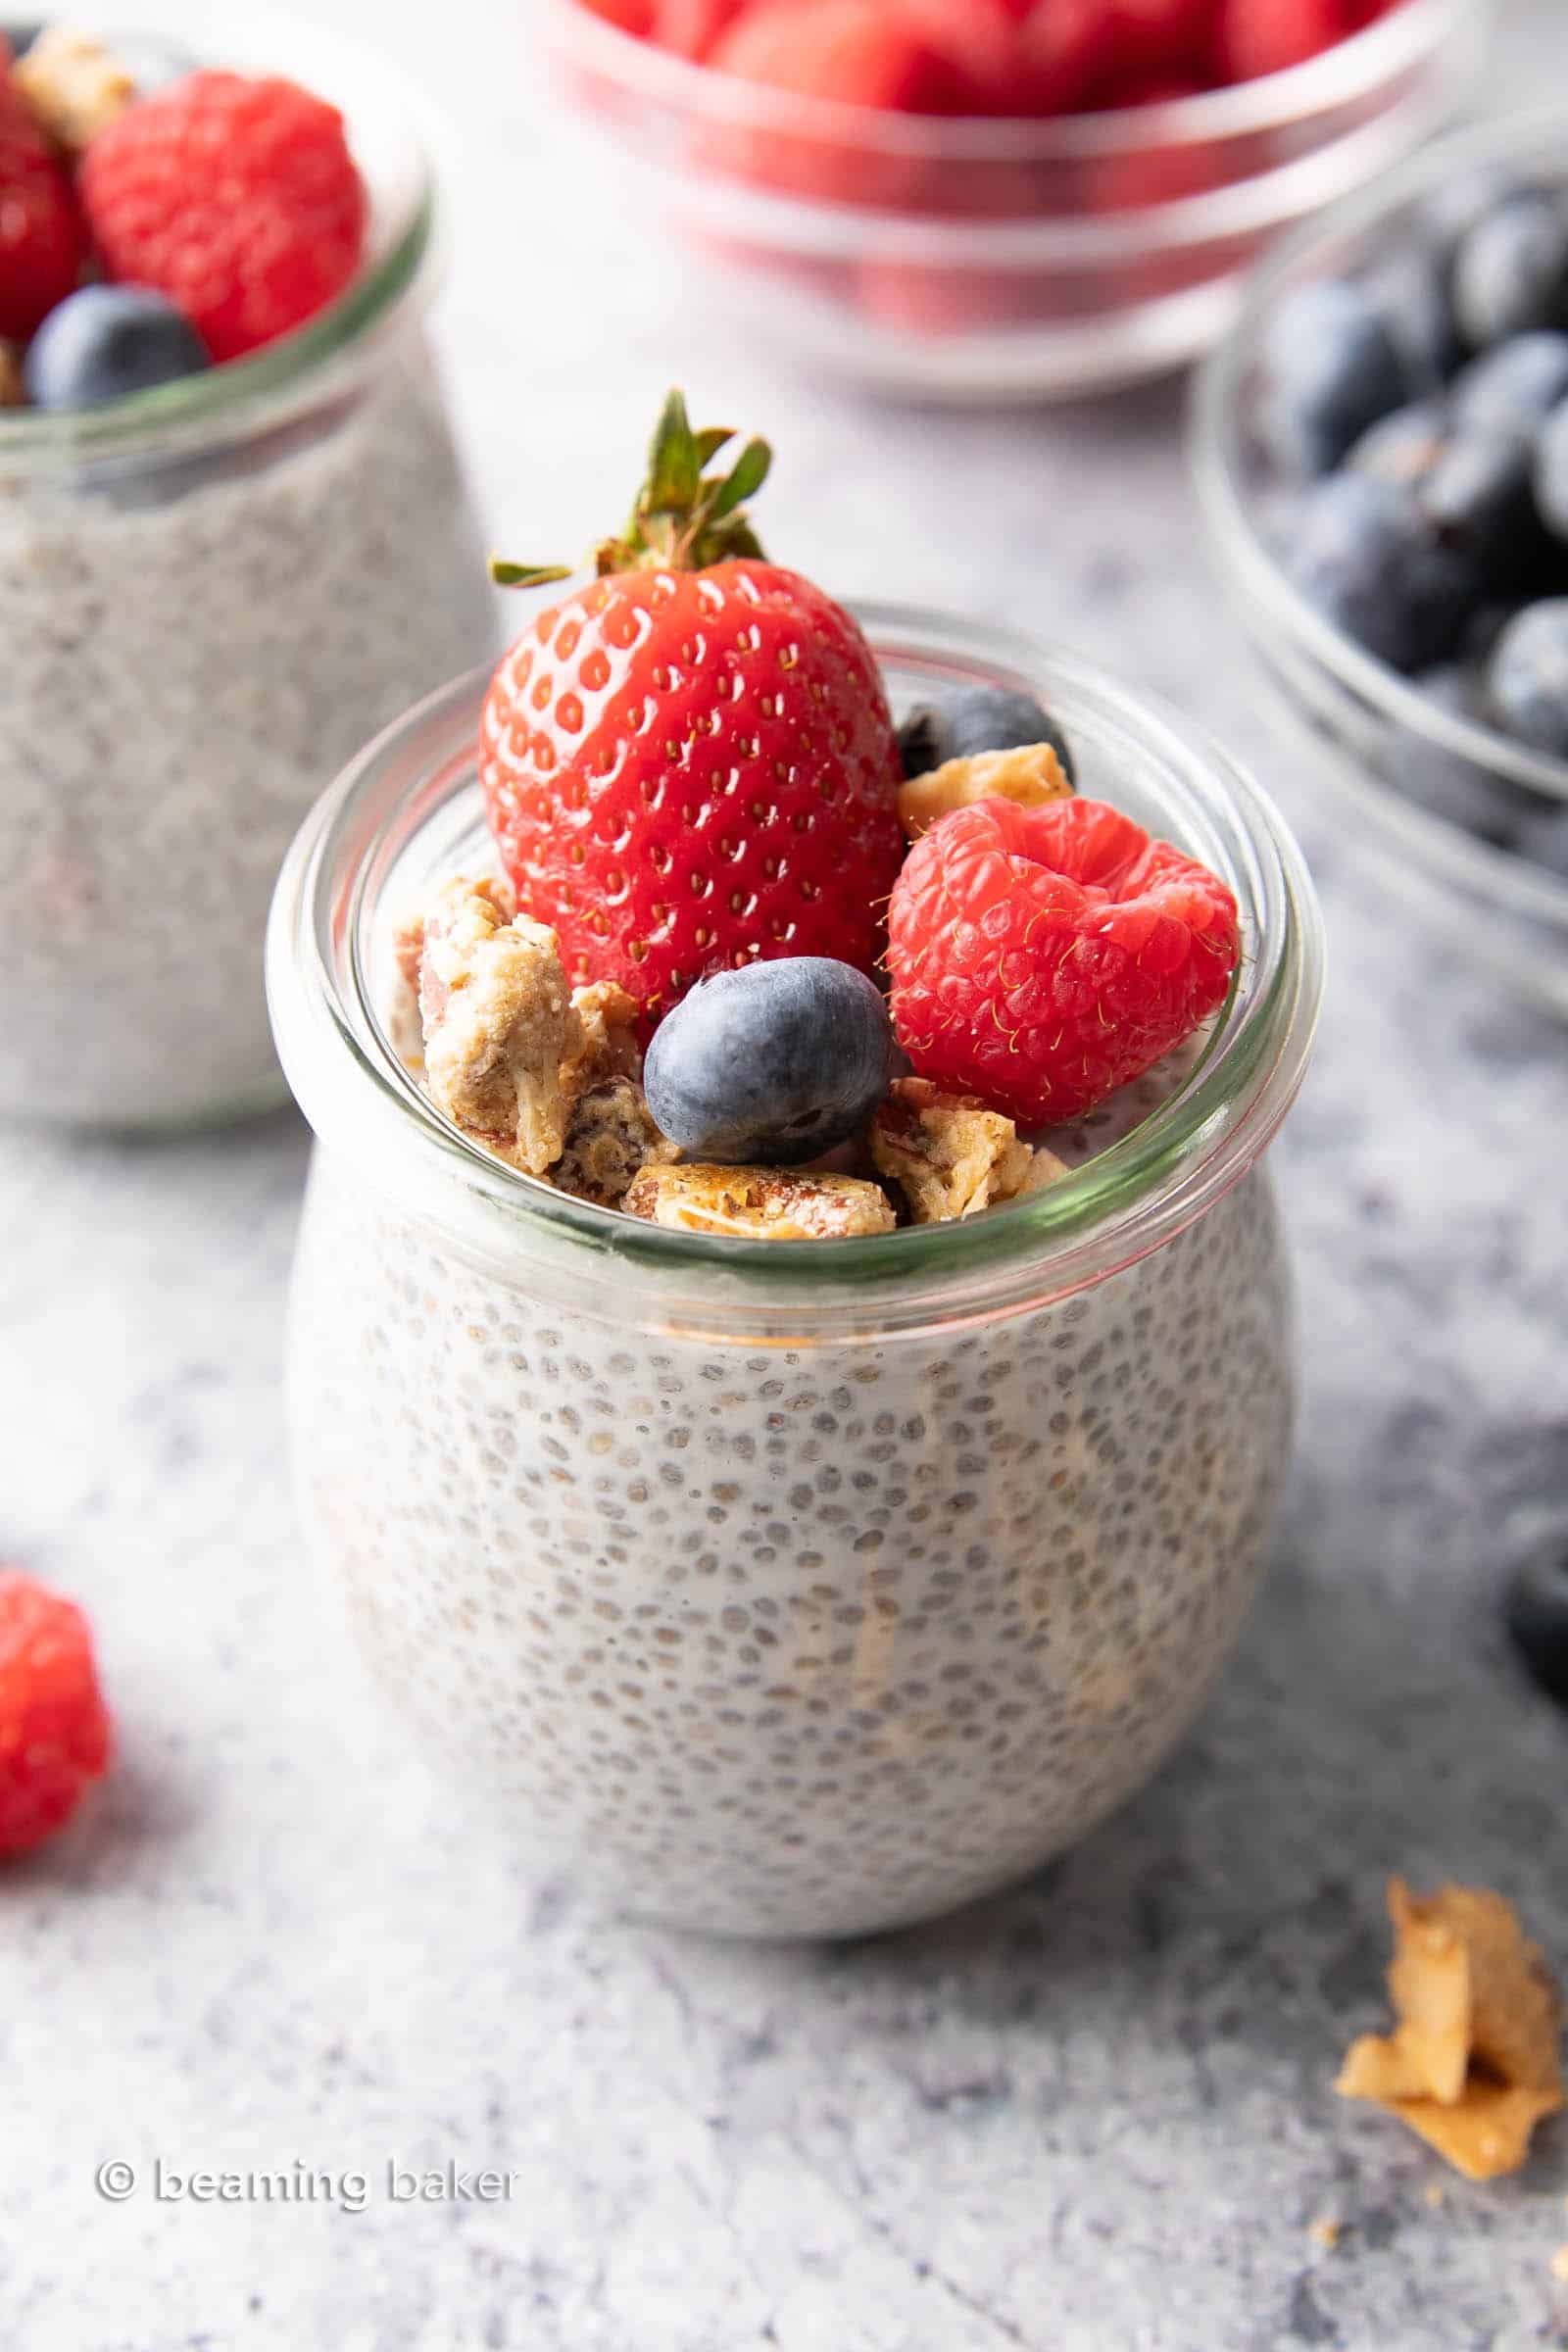 Keto Chia Pudding: this delicious & creamy keto chia pudding recipe needs only 4 ingredients! Just 4 net carbs per serving. Low Carb. #Keto #LowCarb #ChiaPudding #KetoDesserts #ChiaSeeds | Recipe at BeamingBaker.com